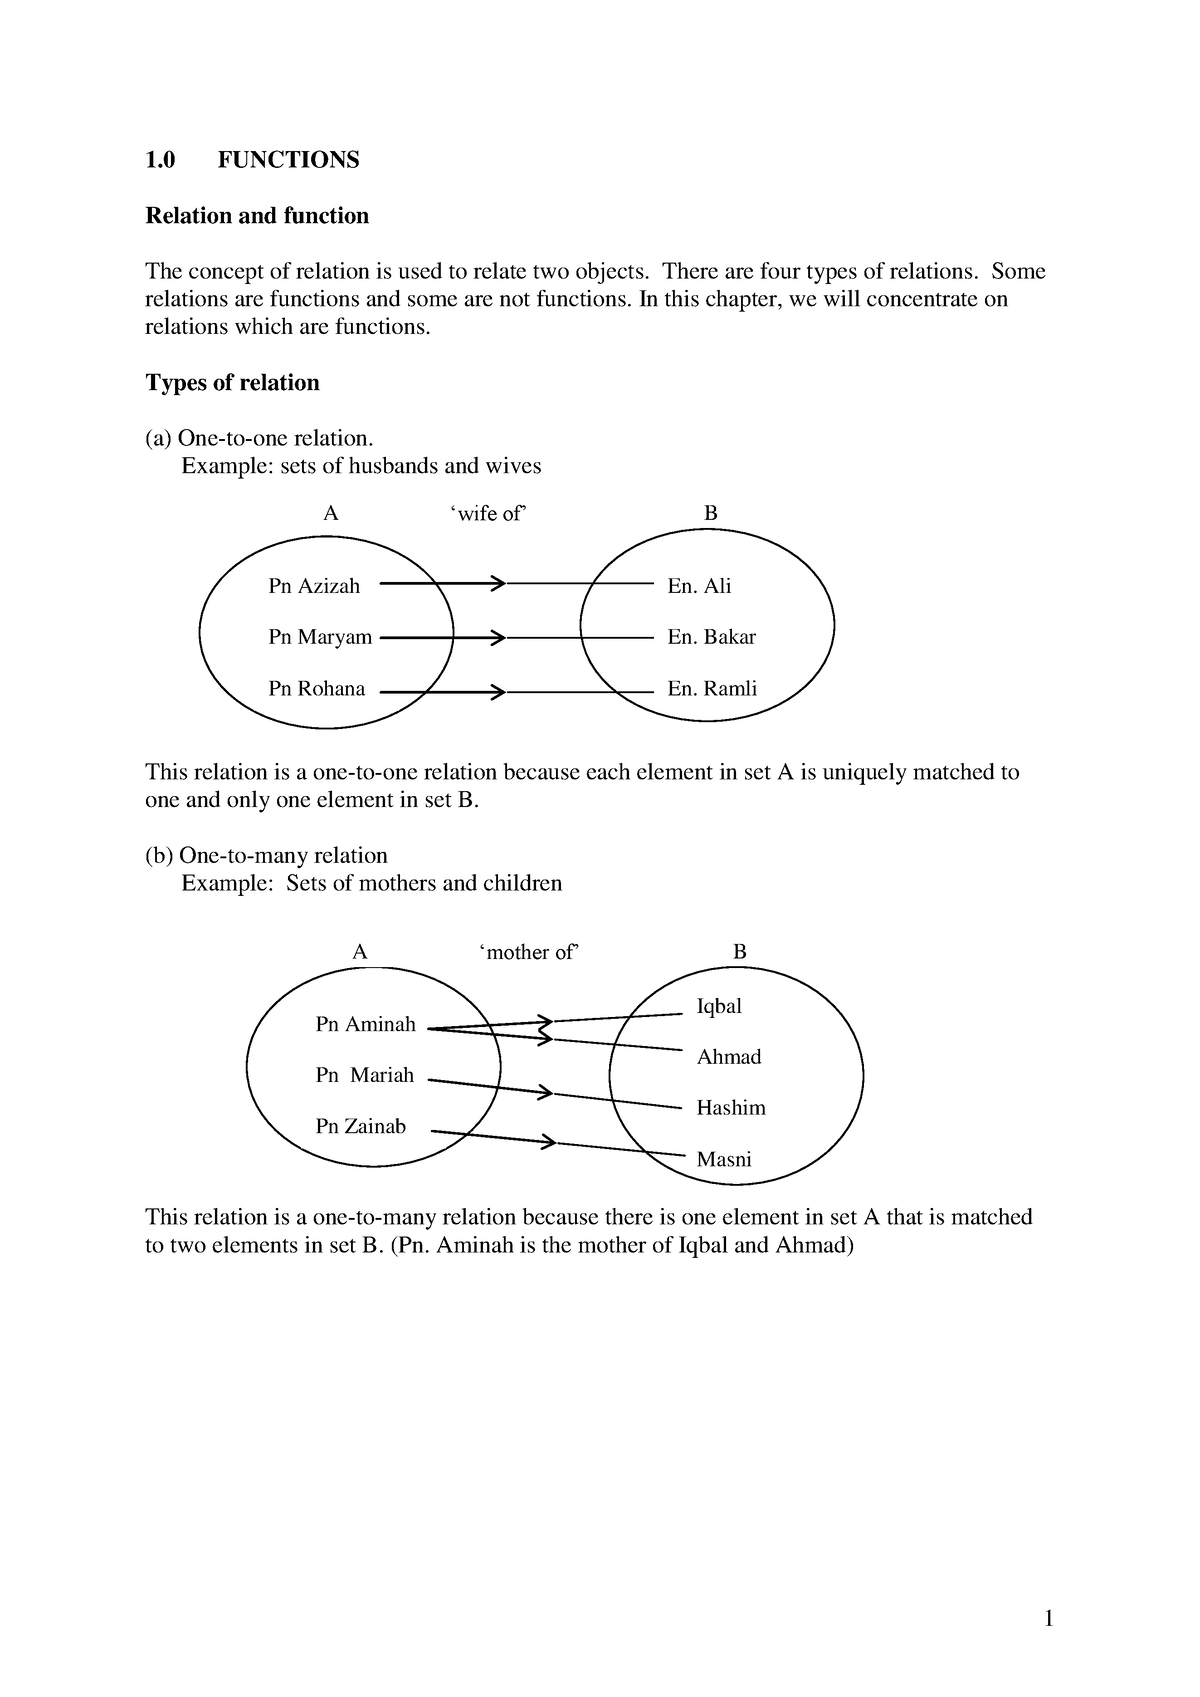 a191-topic-1-pg-1-5-1-functions-relation-and-function-the-concept